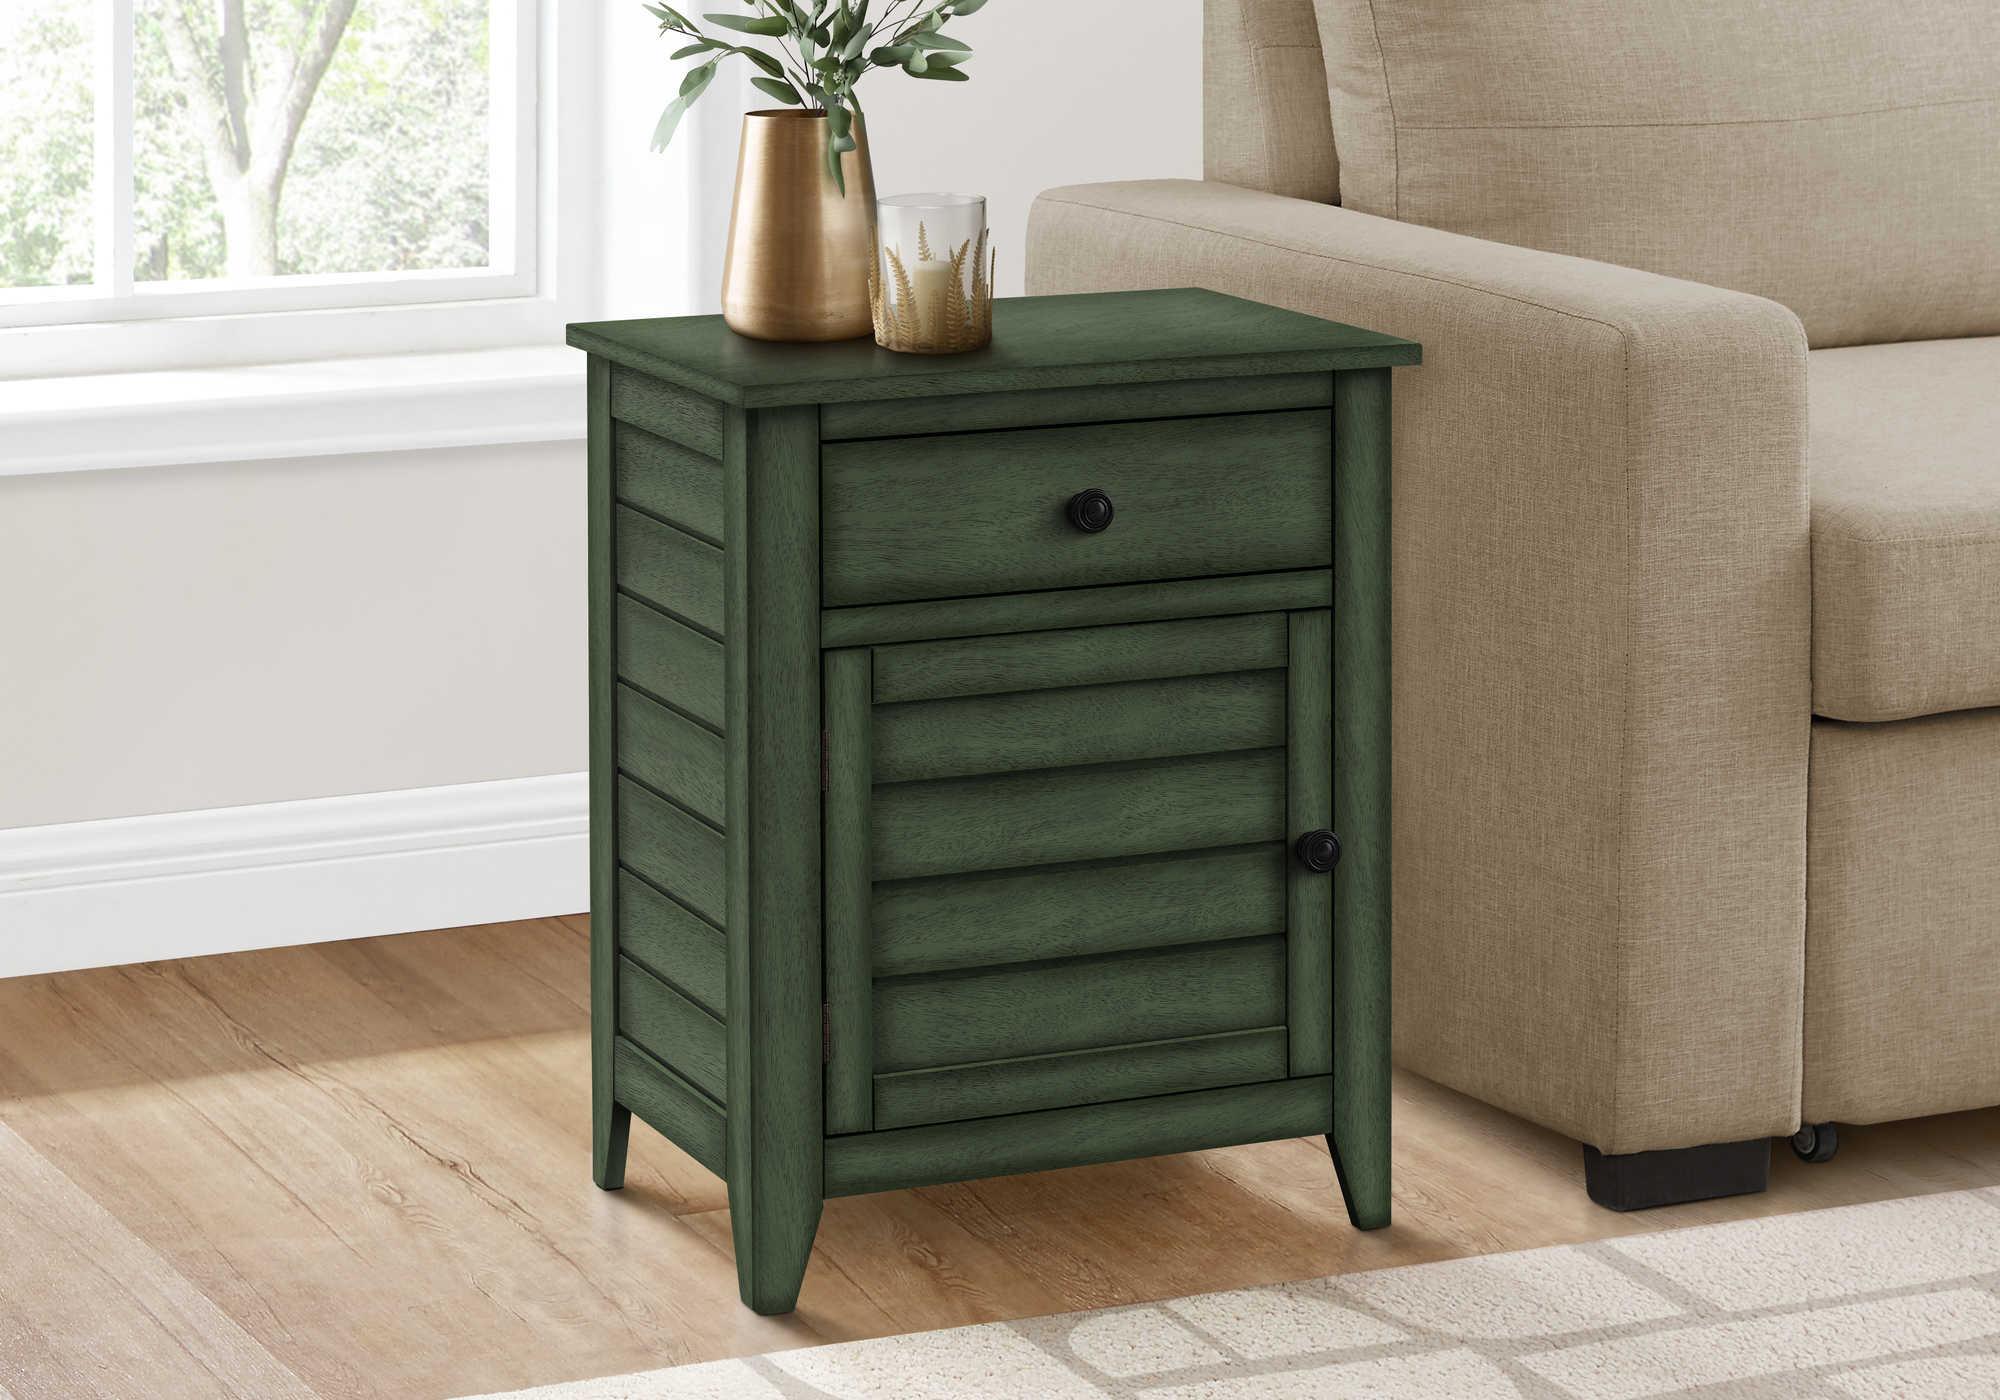 ACCENT TABLE - 25"H / ANTIQUE GREEN VENEER END TABLE